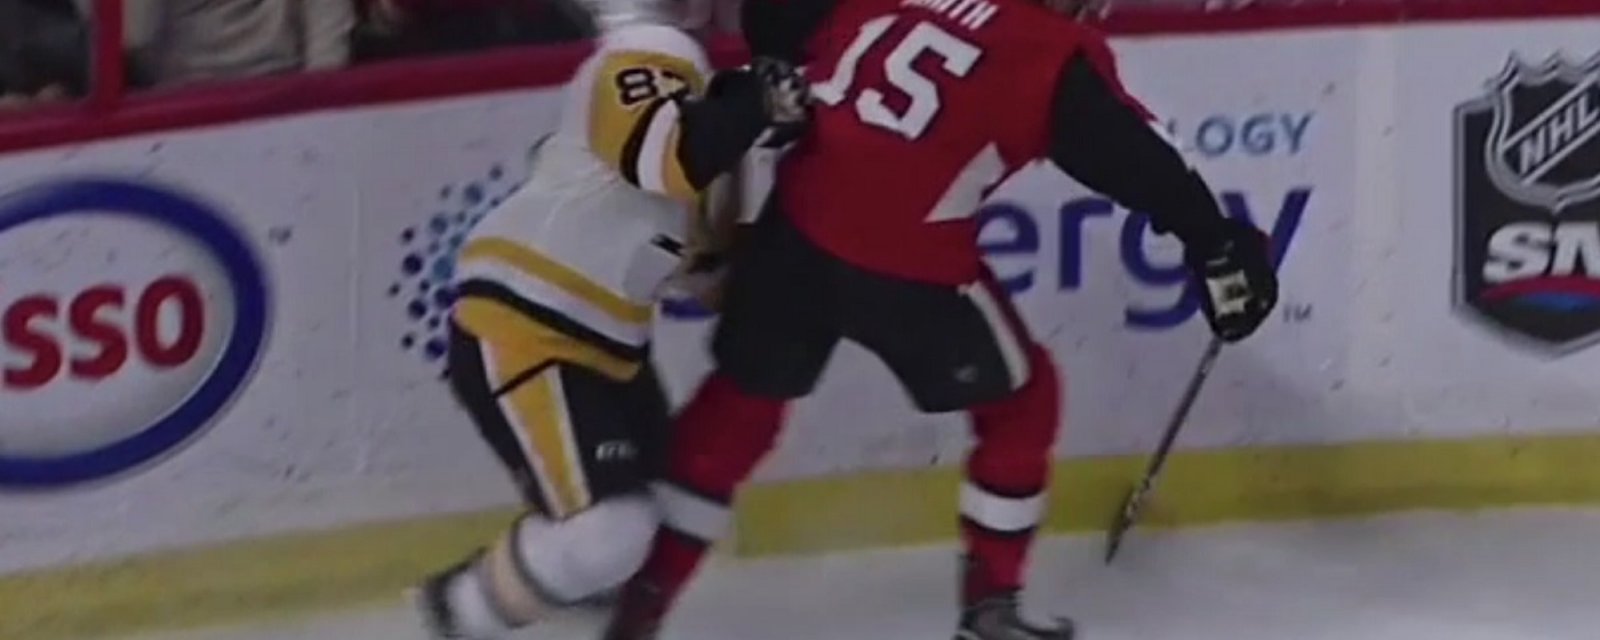 Crosby takes two dangerous elbows to the head in a single game.